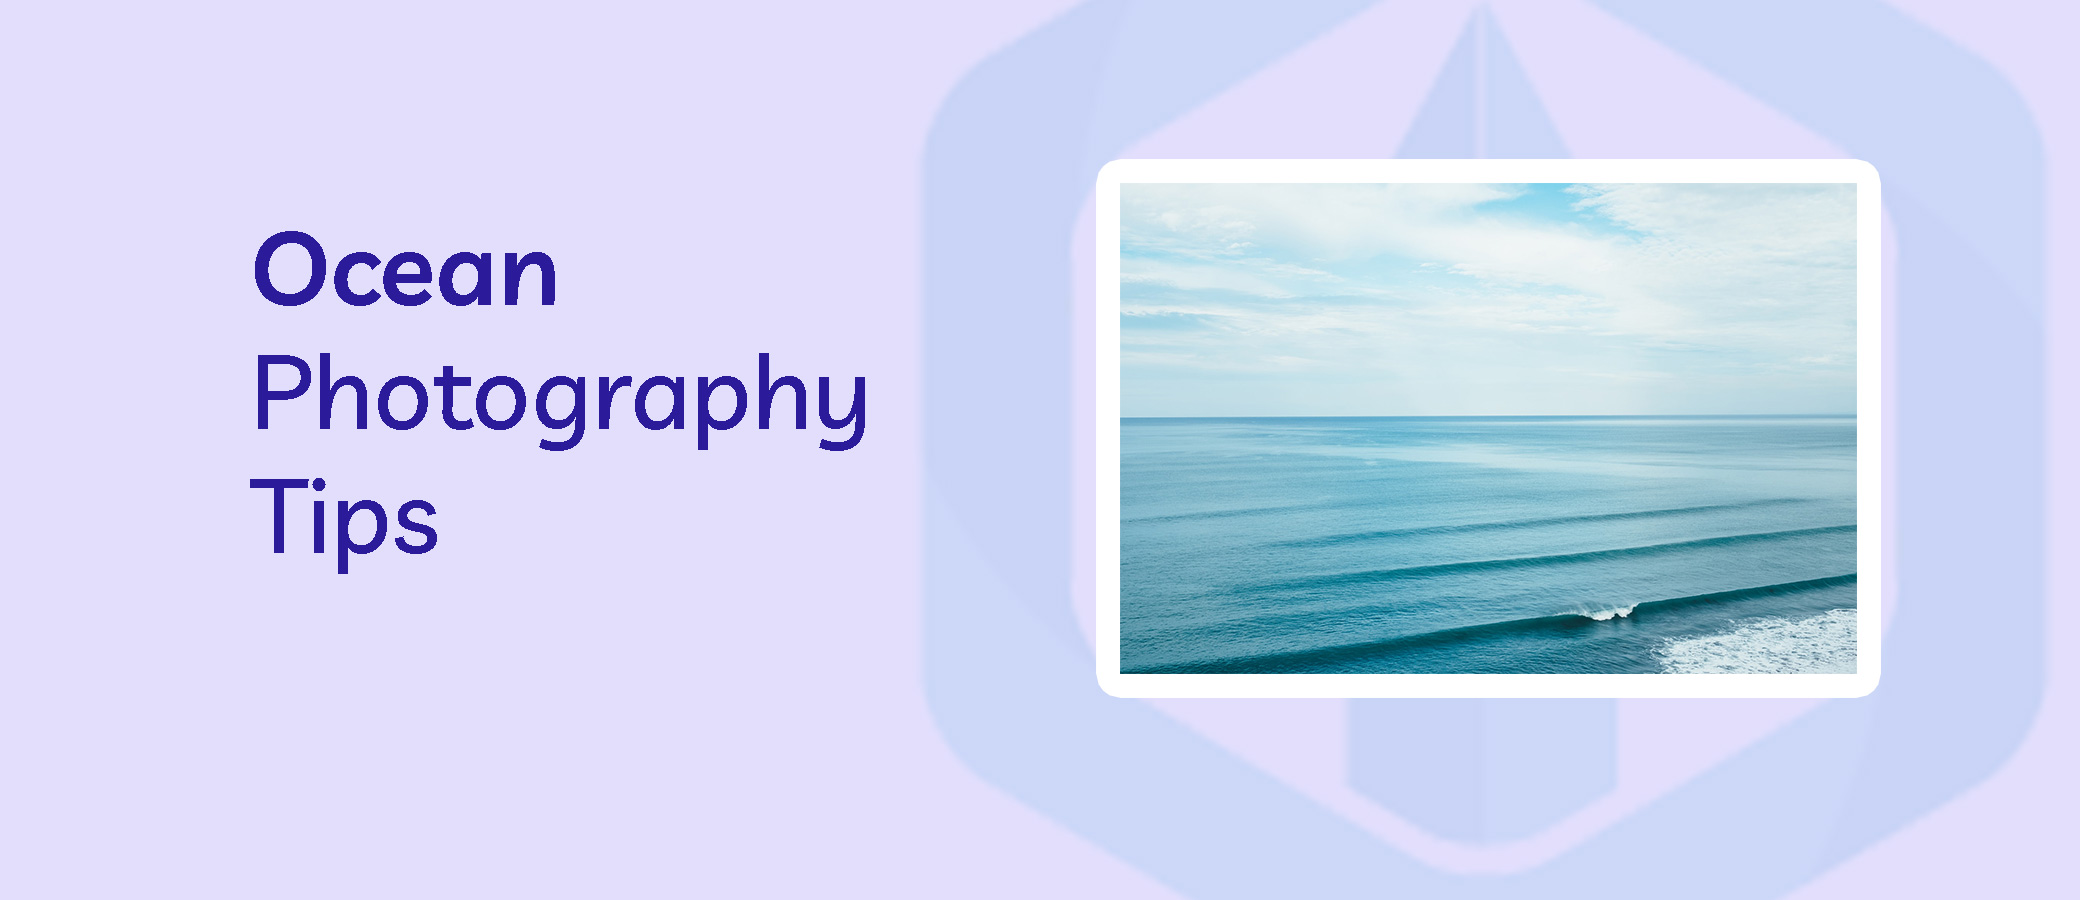 ocean photography tips for beginners